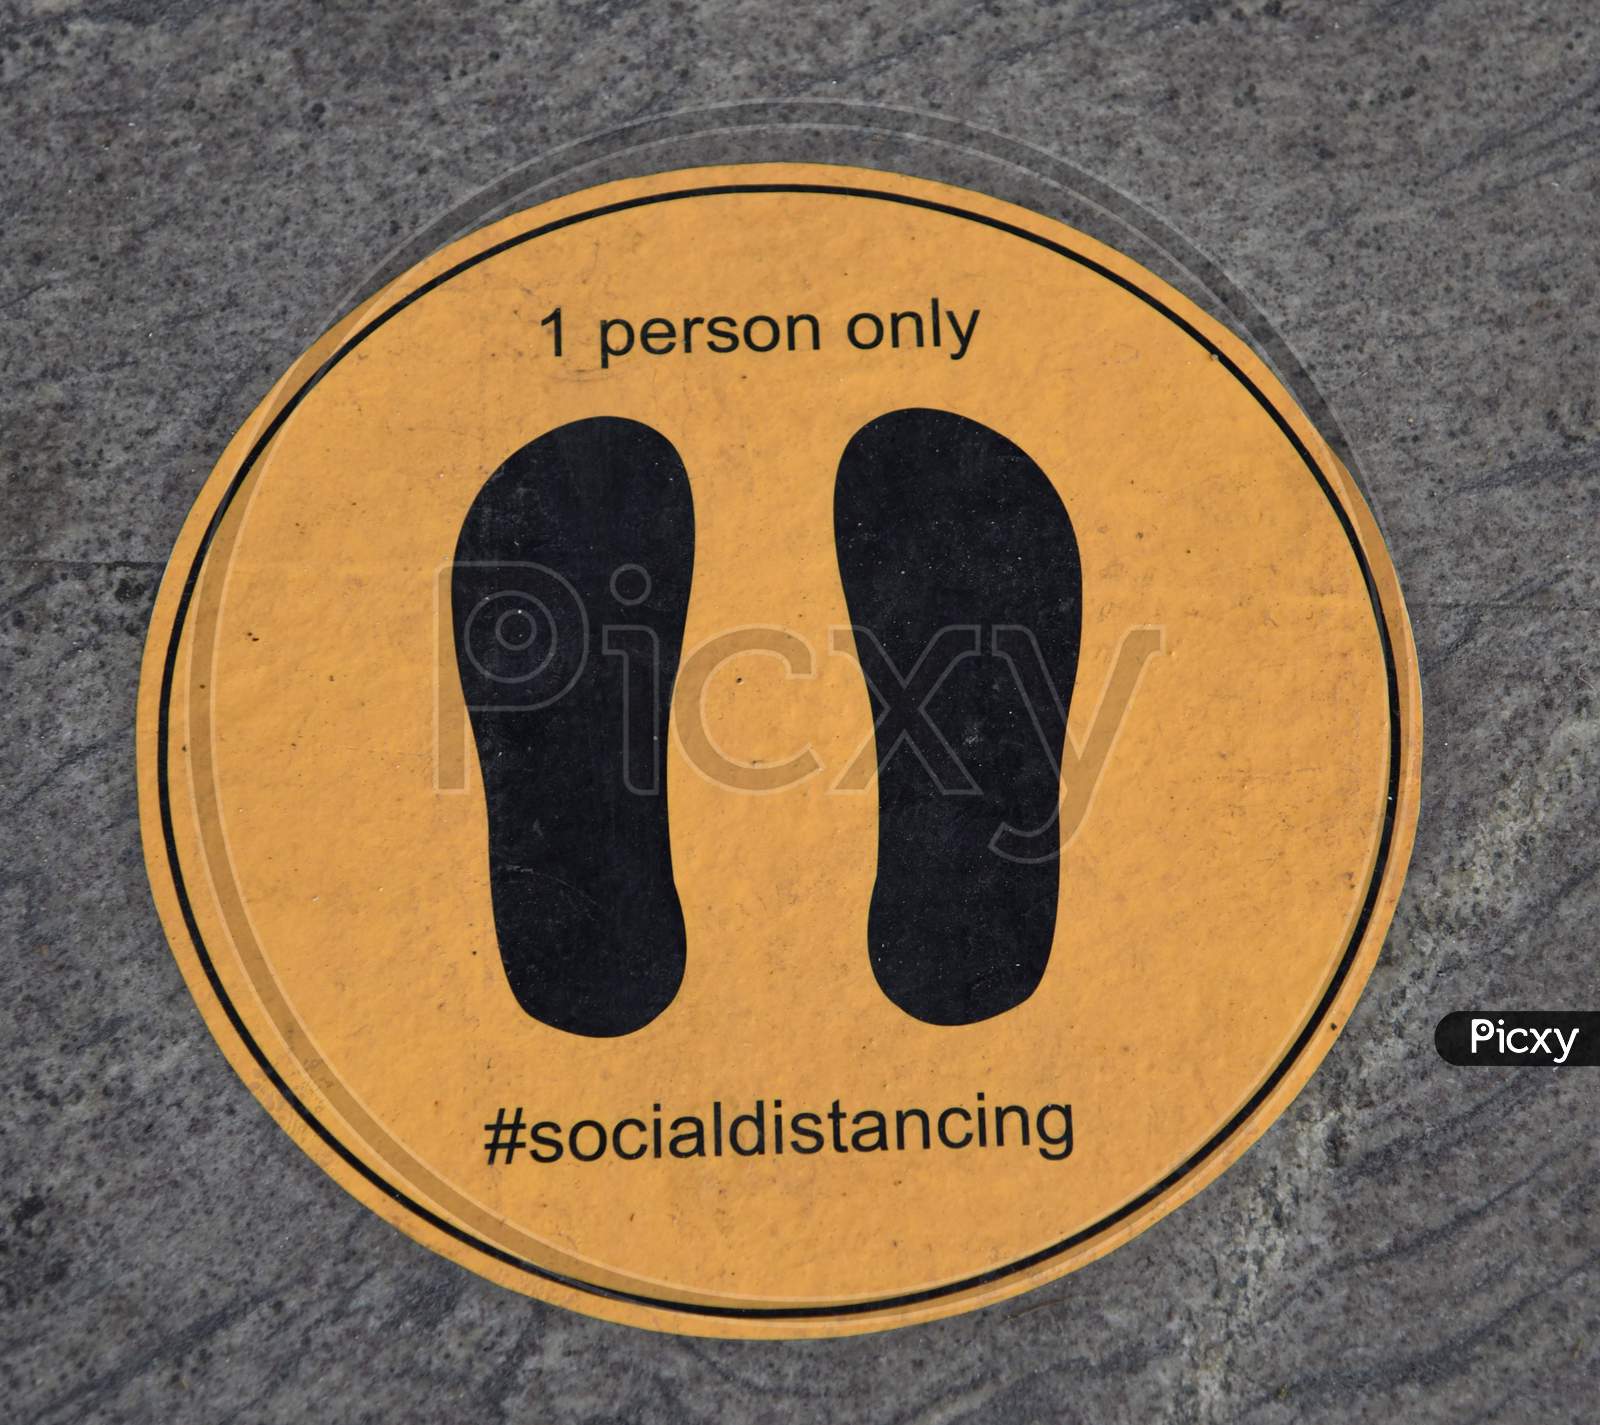 A Sticker Is Glued On The Floor To Help Maintain Social Distancing